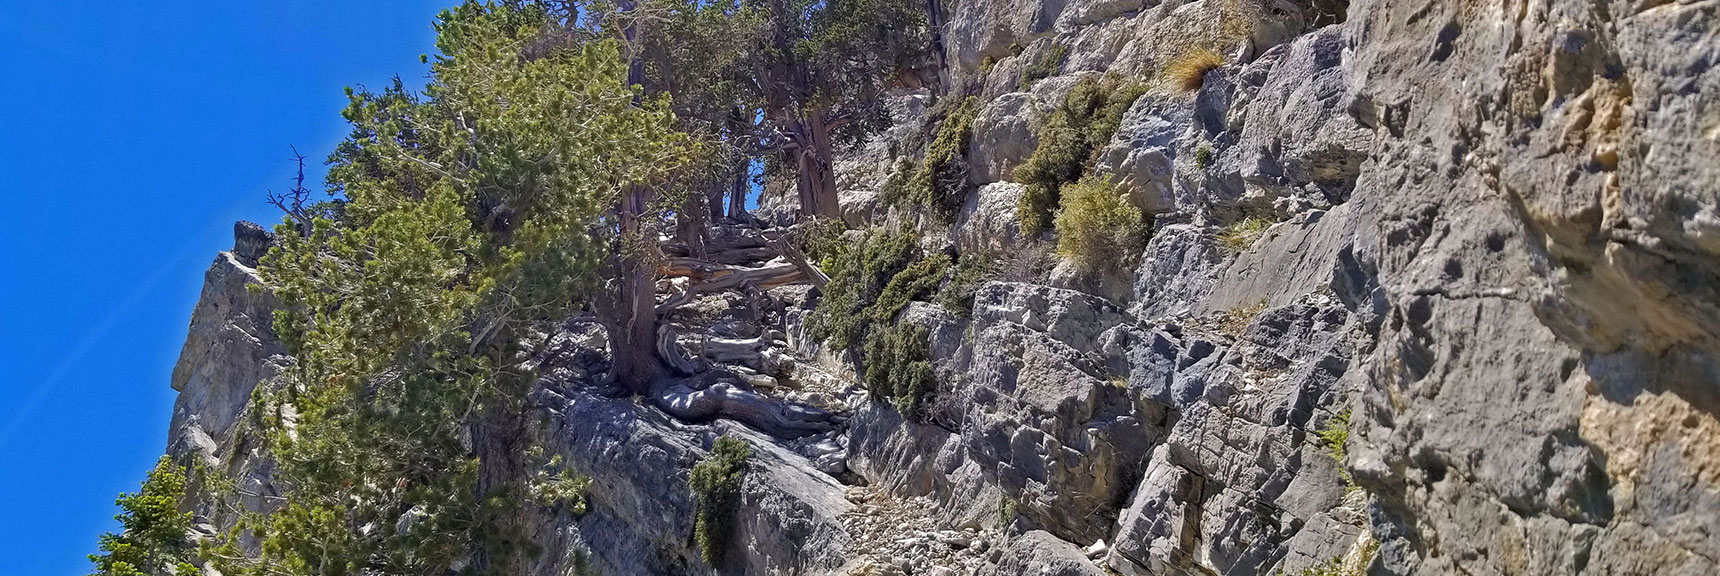 View Up Final Approach Ledge. Will Return in the September/October | Macks Peak | Mt Charleston Wilderness | Spring Mountains, Nevada